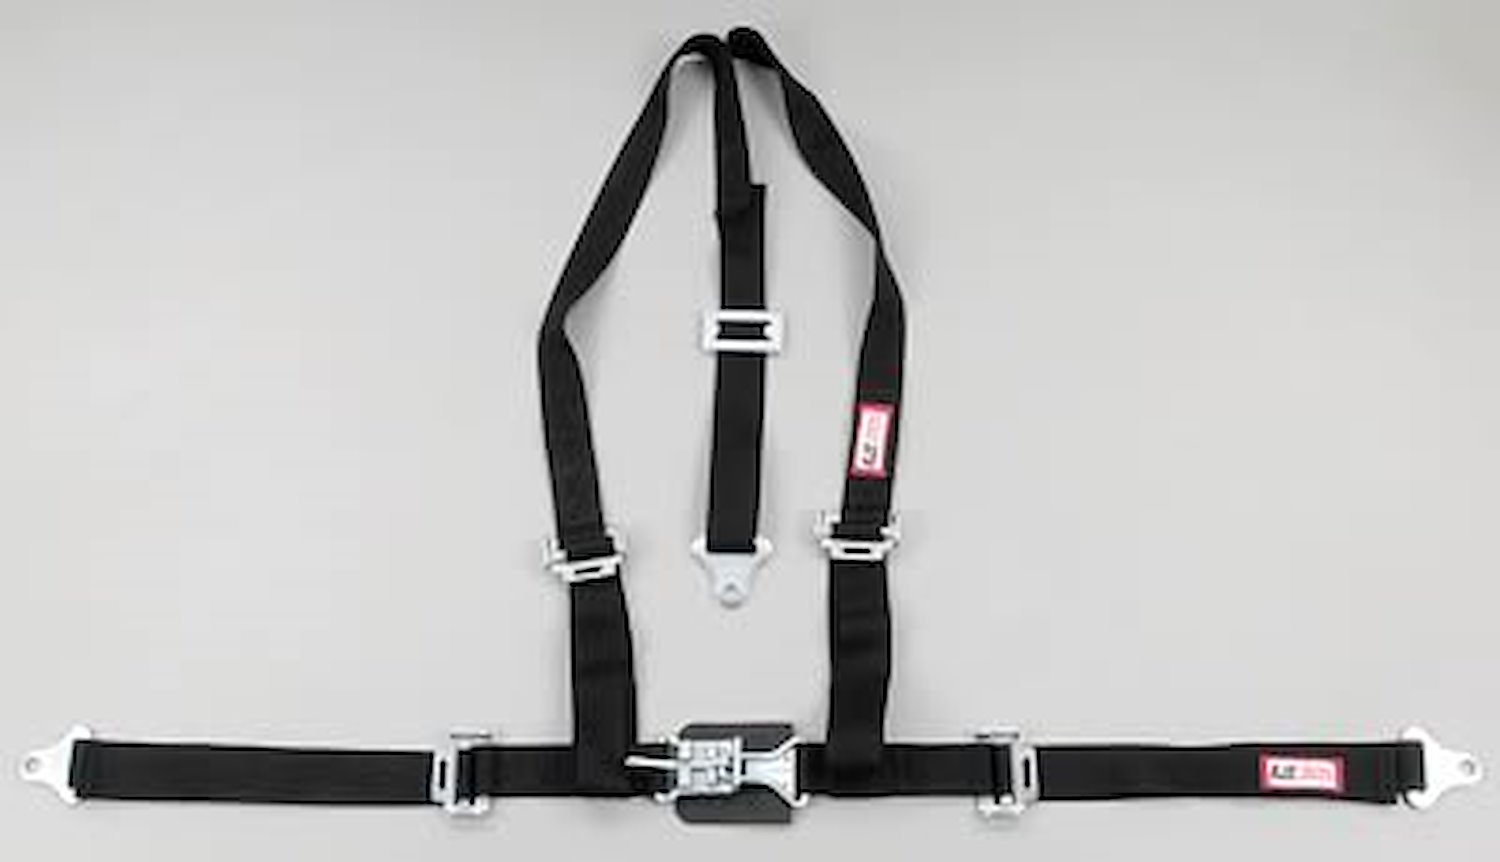 NON-SFI L&L HARNESS 3 PULL DOWN Lap Belt w/adjuster 2 S.H. V ROLL BAR Mount ALL WRAP ENDS RED